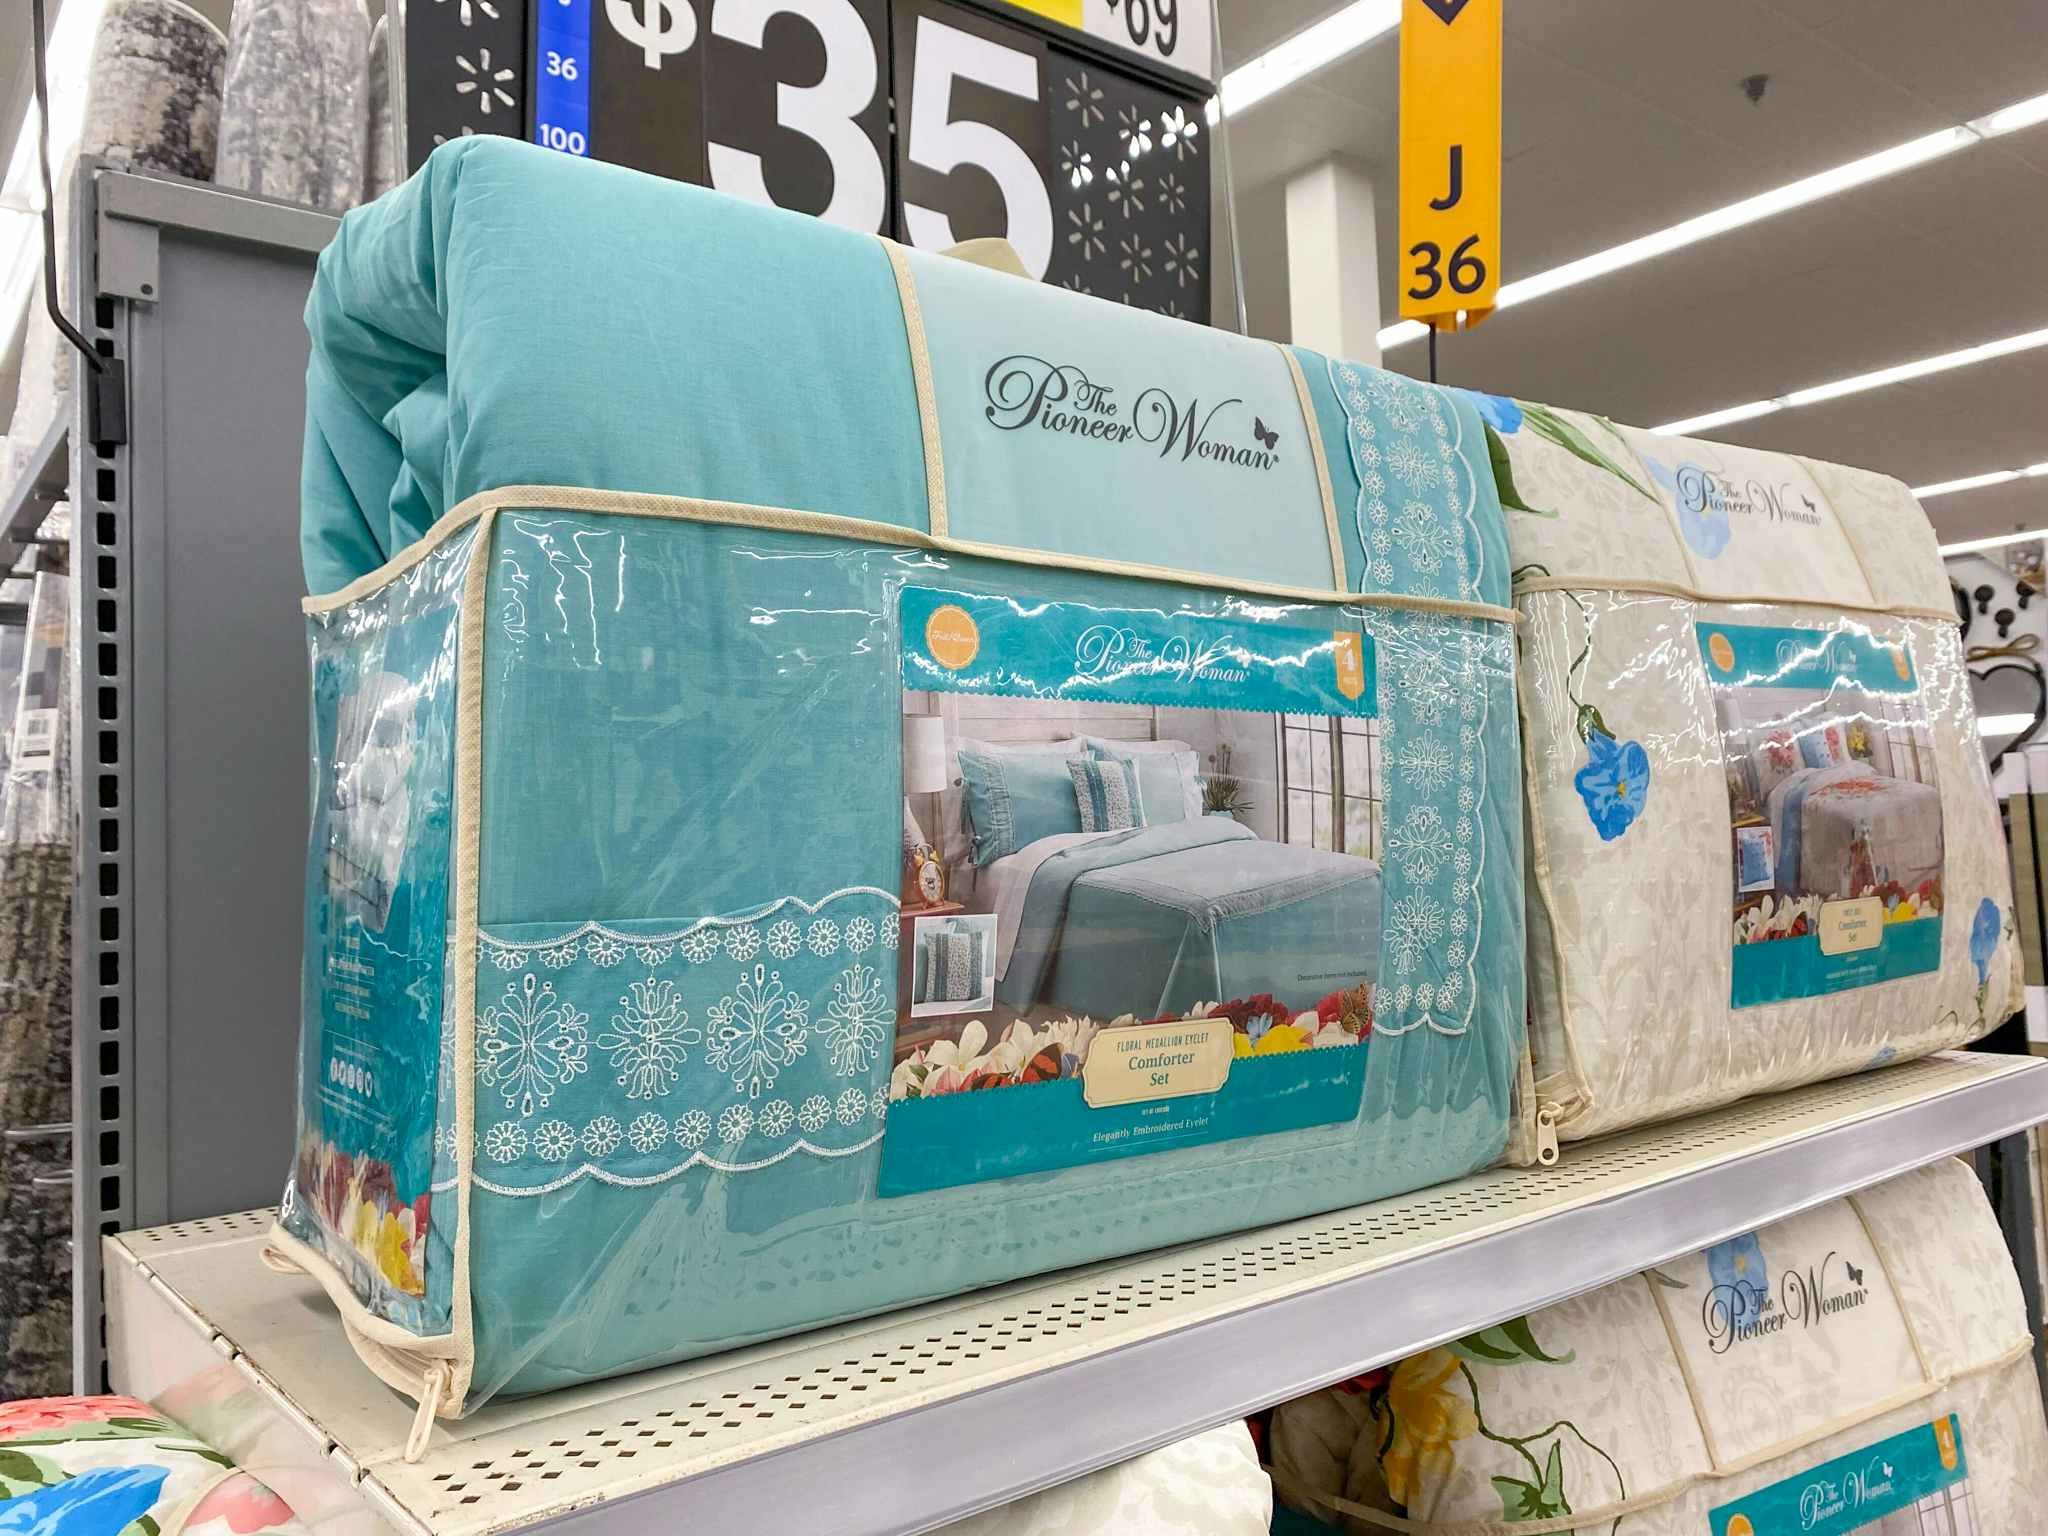 https://prod-cdn-thekrazycouponlady.imgix.net/wp-content/uploads/2022/03/walmart-pioneer-woman-comforter-clearance-floral-medallion-eyelet-2022-1646150975-1646150975.jpg?auto=format&fit=fill&q=25